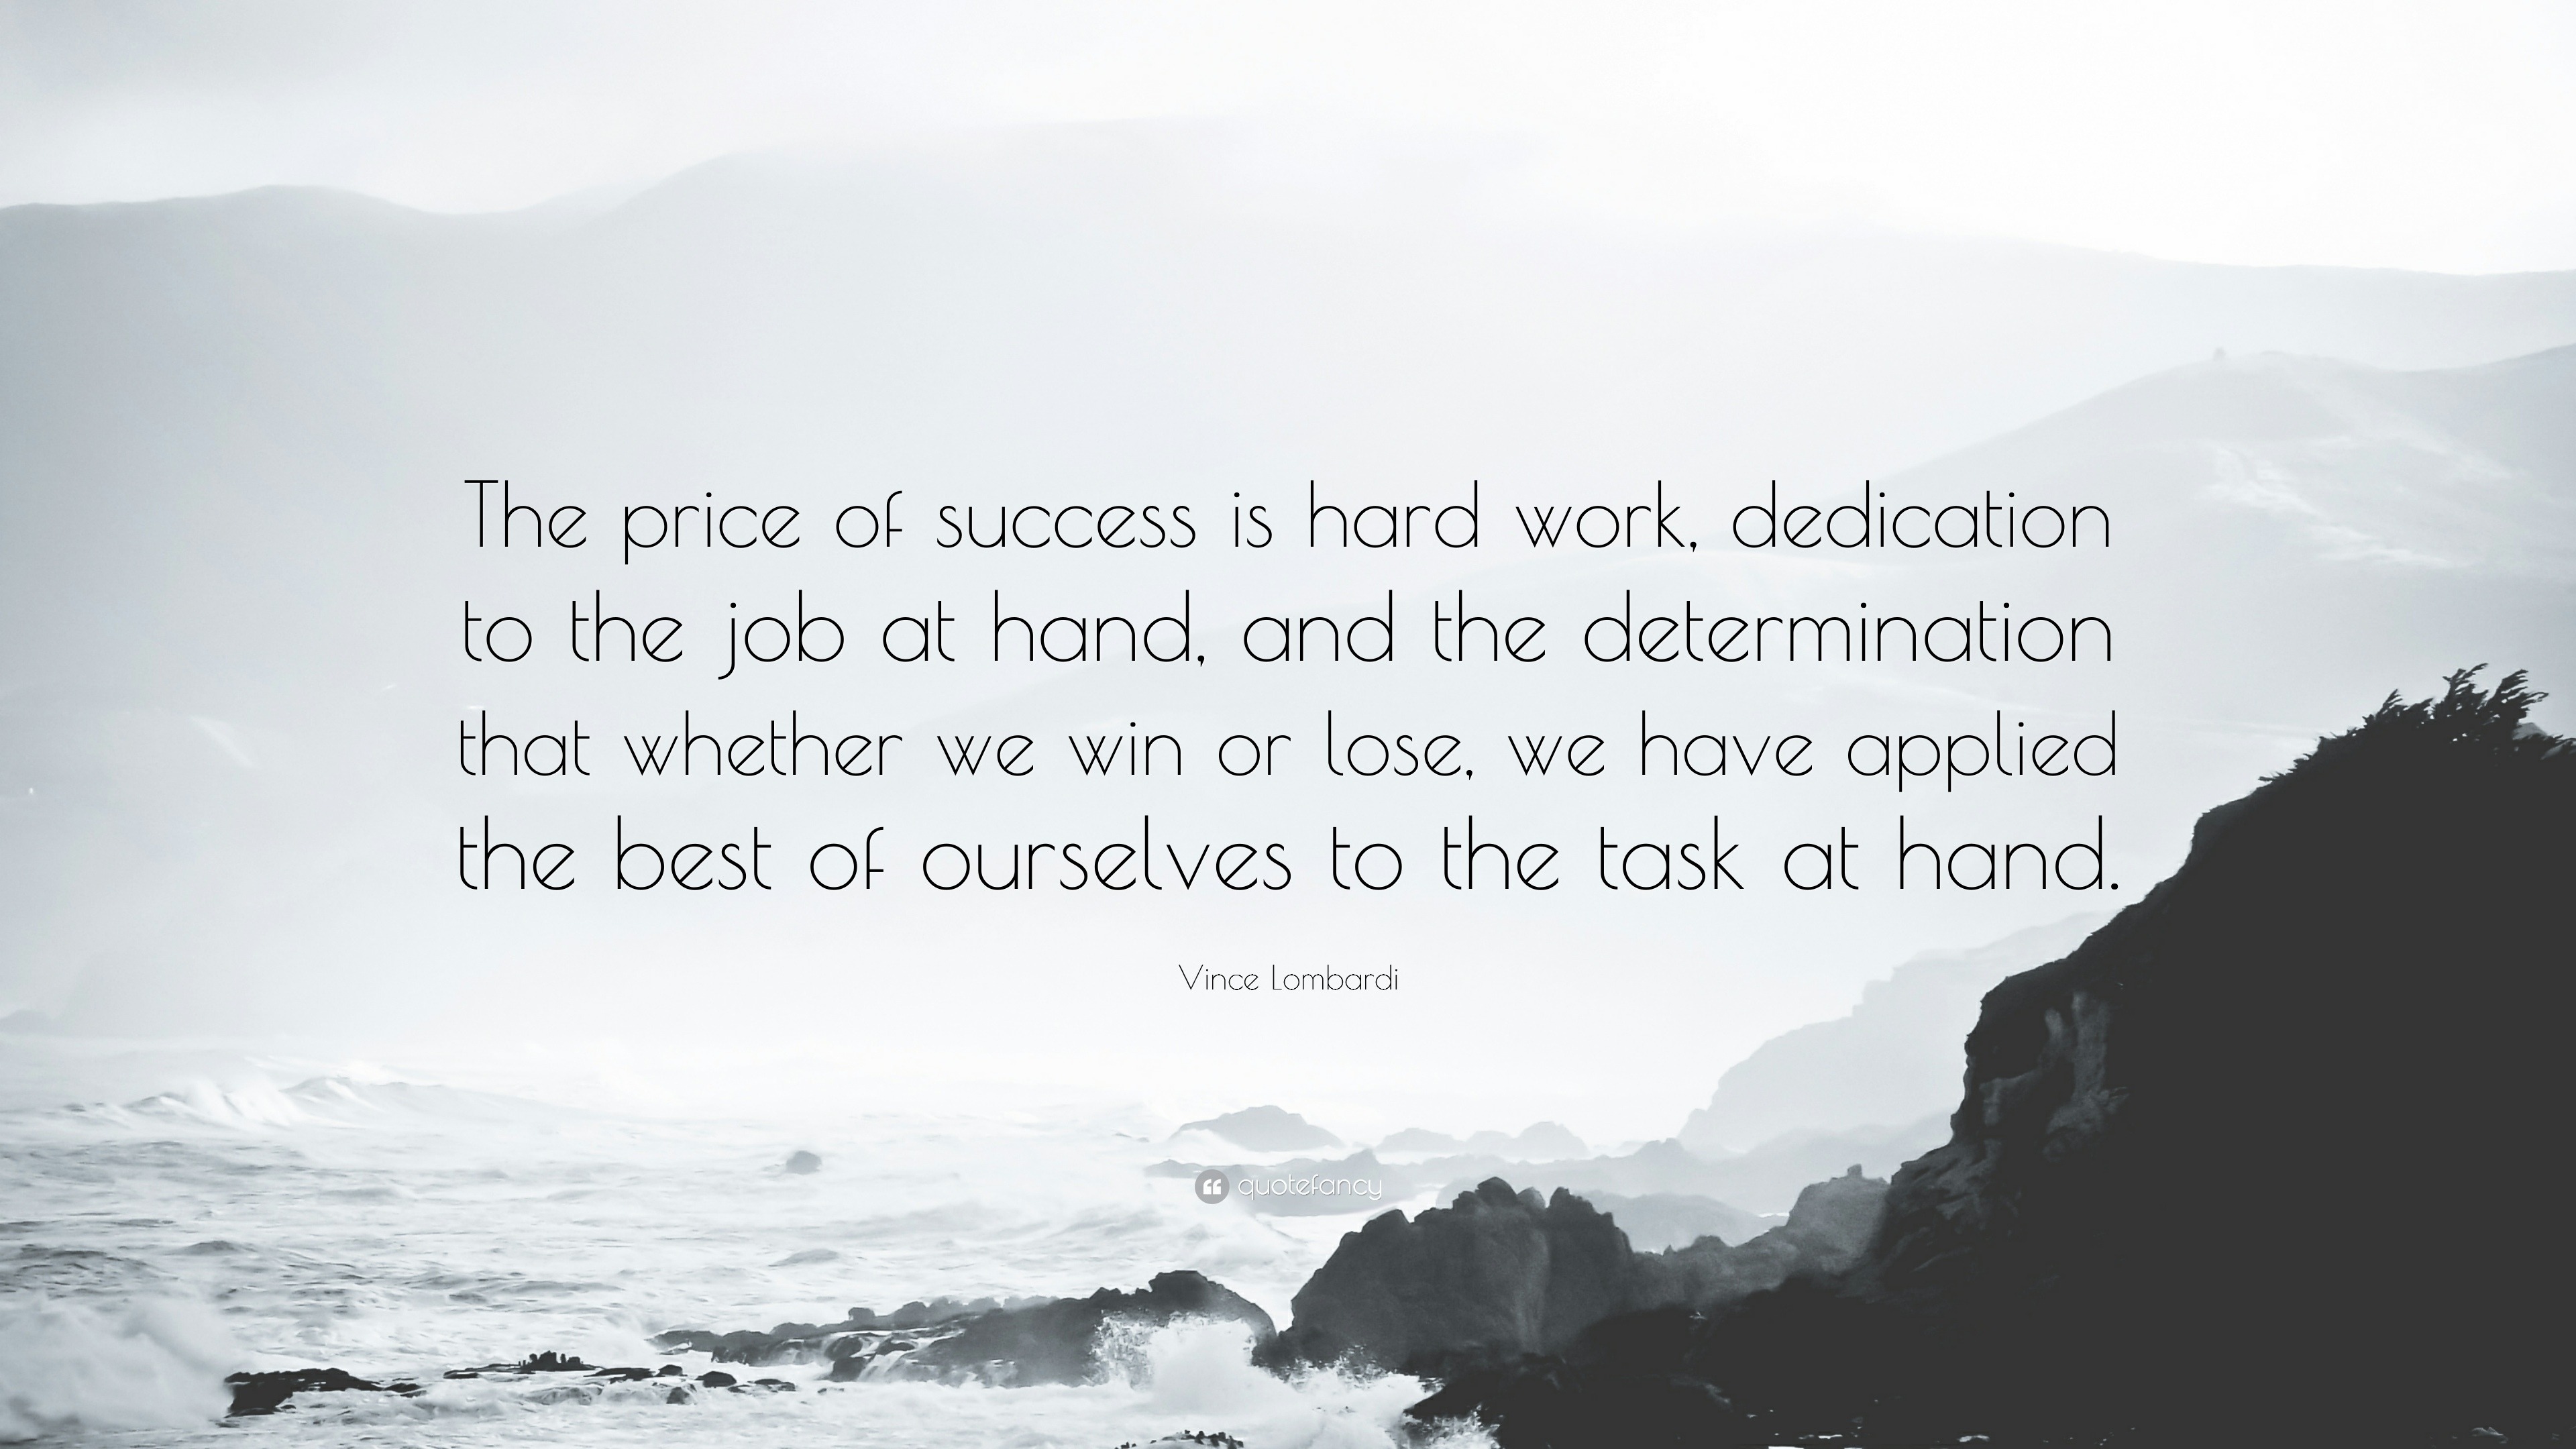 Vince Lombardi Quote: “The price of success is hard work, dedication to the  job at hand, and the determination that whether we win or lose, we ...”